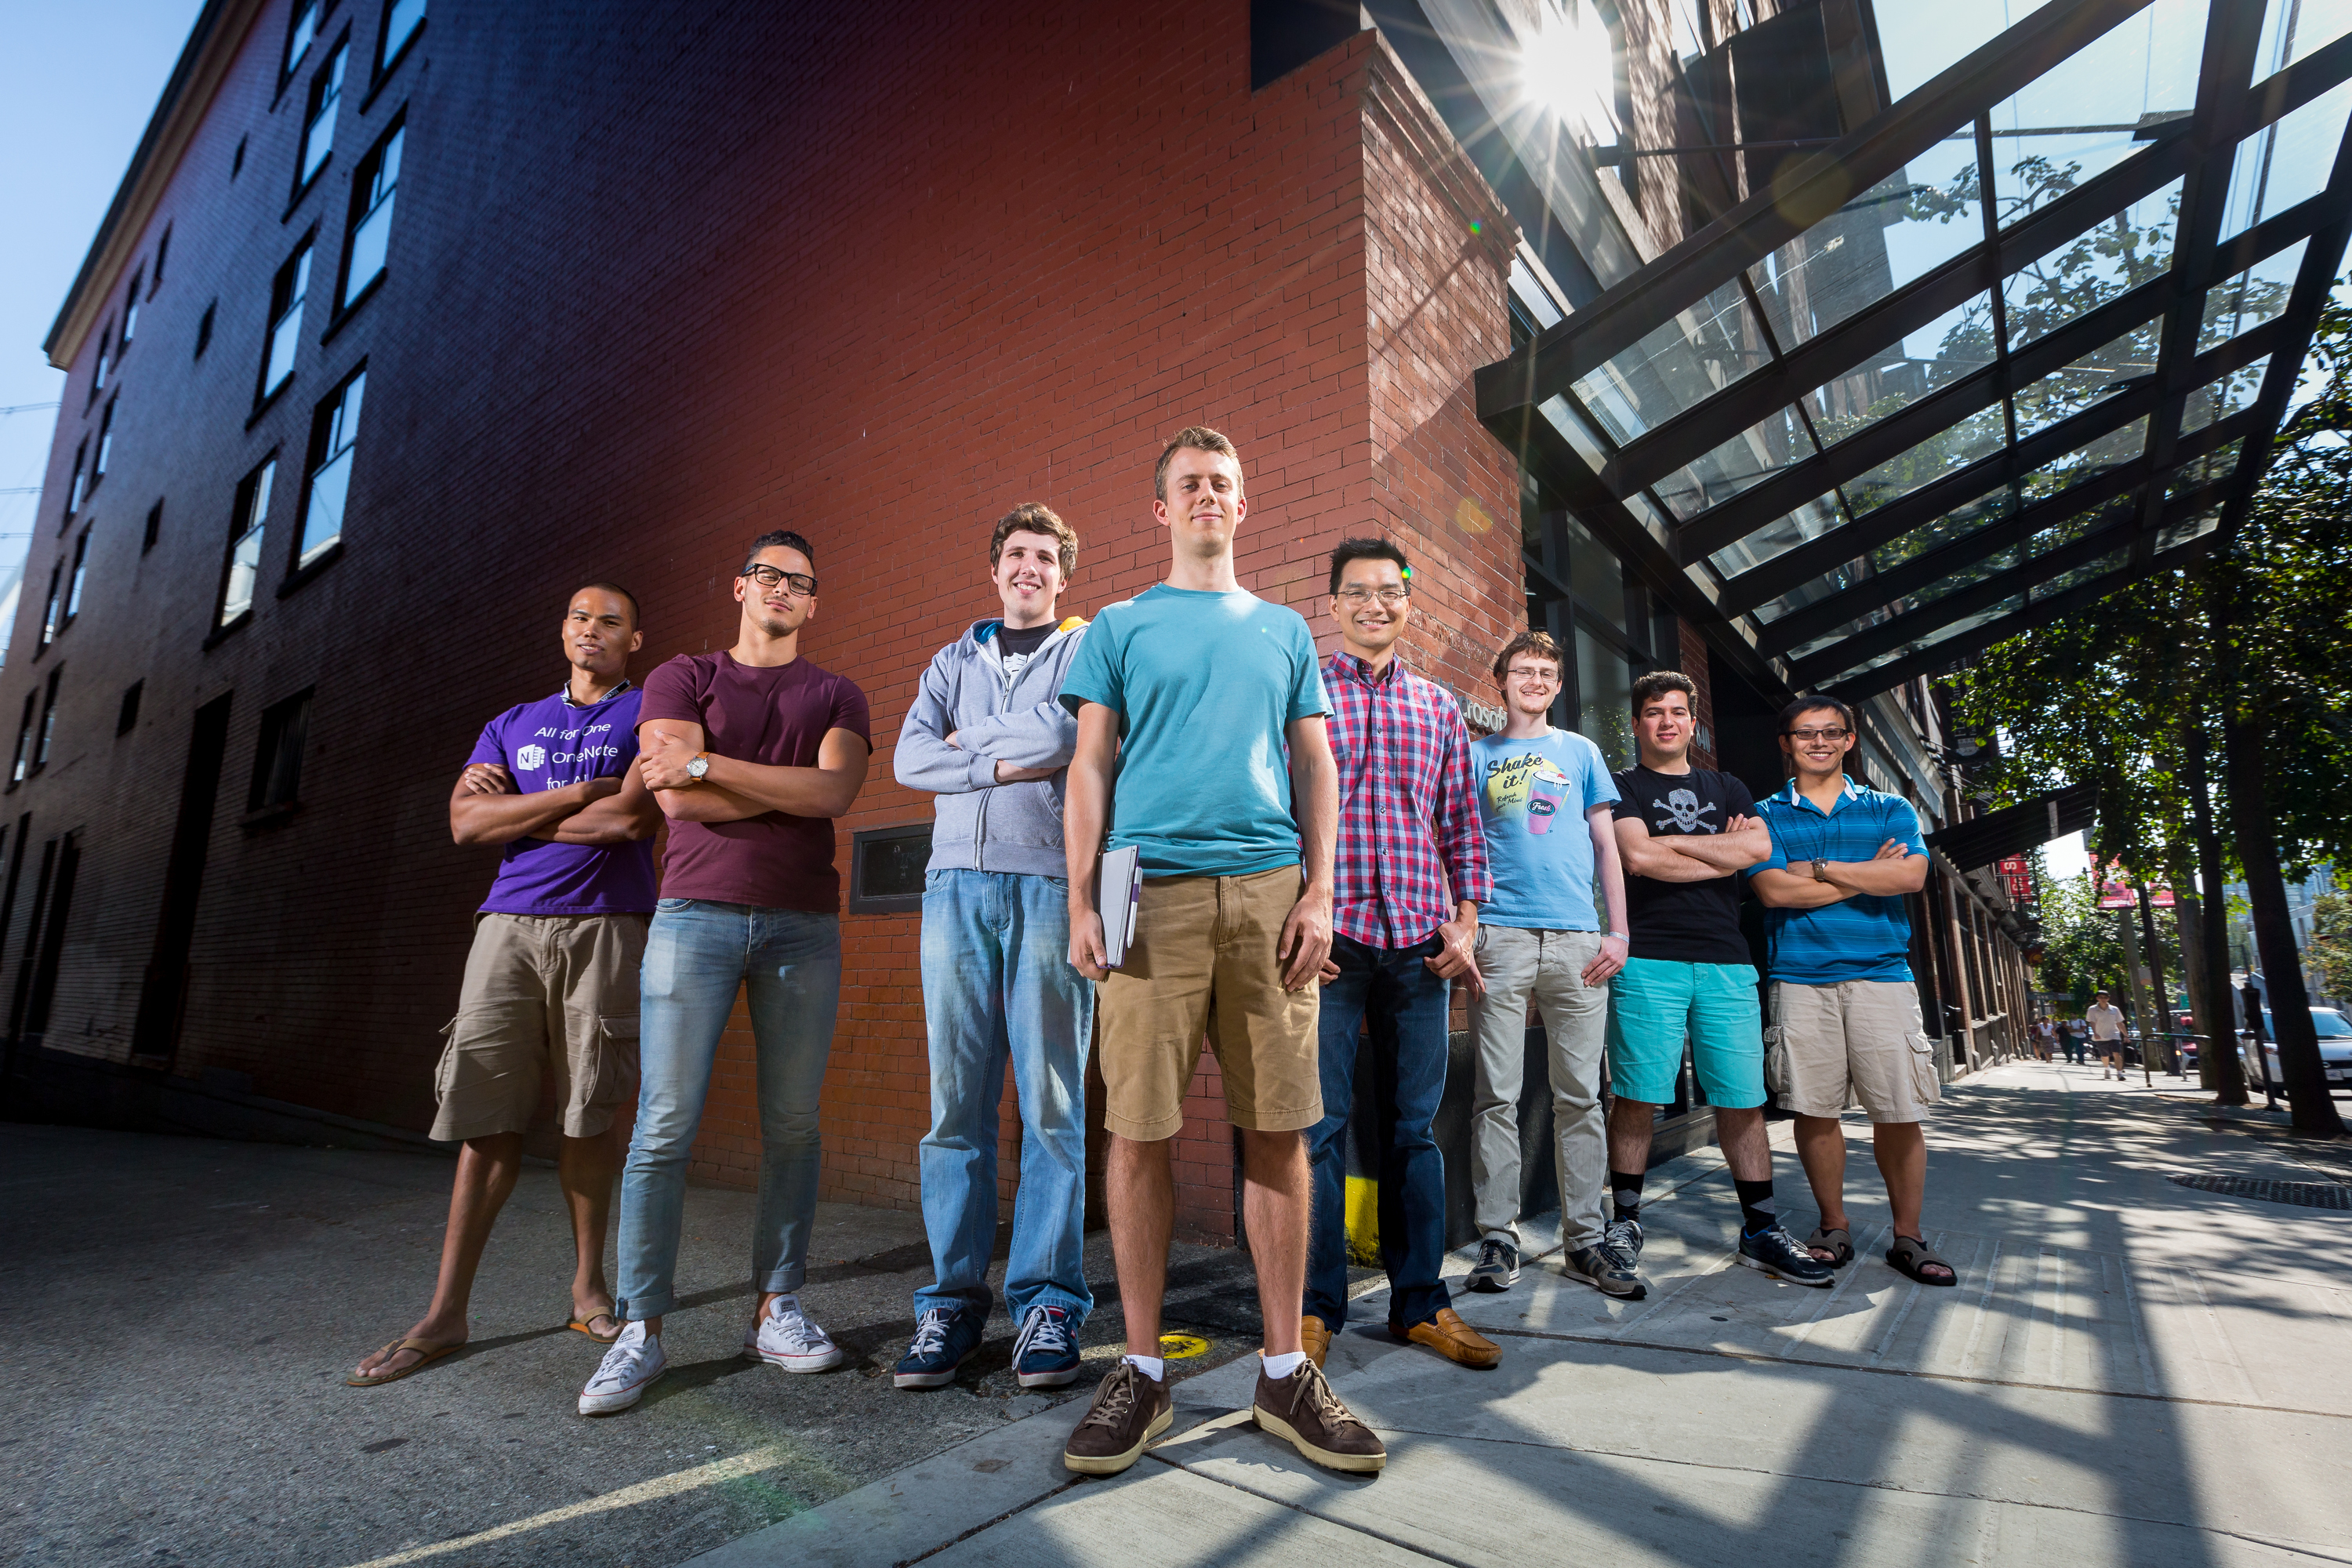 OneNote Hackathon finalists OneNote team in Vancuouver, Canada (left to right) Mark Flores, Alex Pereira, Sebastian Greaves, Pelle Nielsen, Scott Leong, Dominik Messinger, Reza Jooyandeh, Ken Wong on August 11, 2015. (Photography by Scott Eklund/Red Box Pictures) 